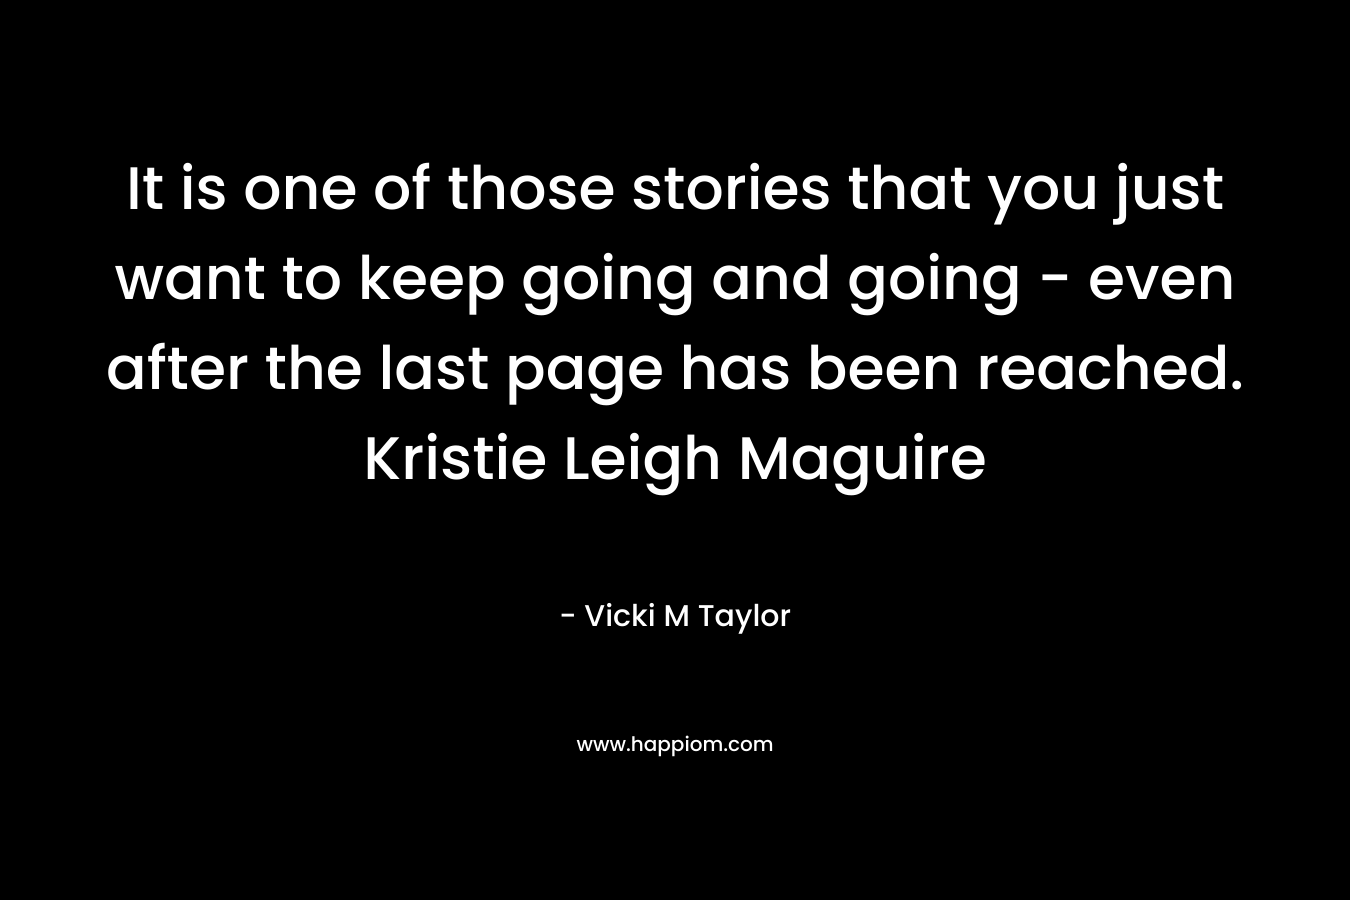 It is one of those stories that you just want to keep going and going – even after the last page has been reached. Kristie Leigh Maguire – Vicki M Taylor